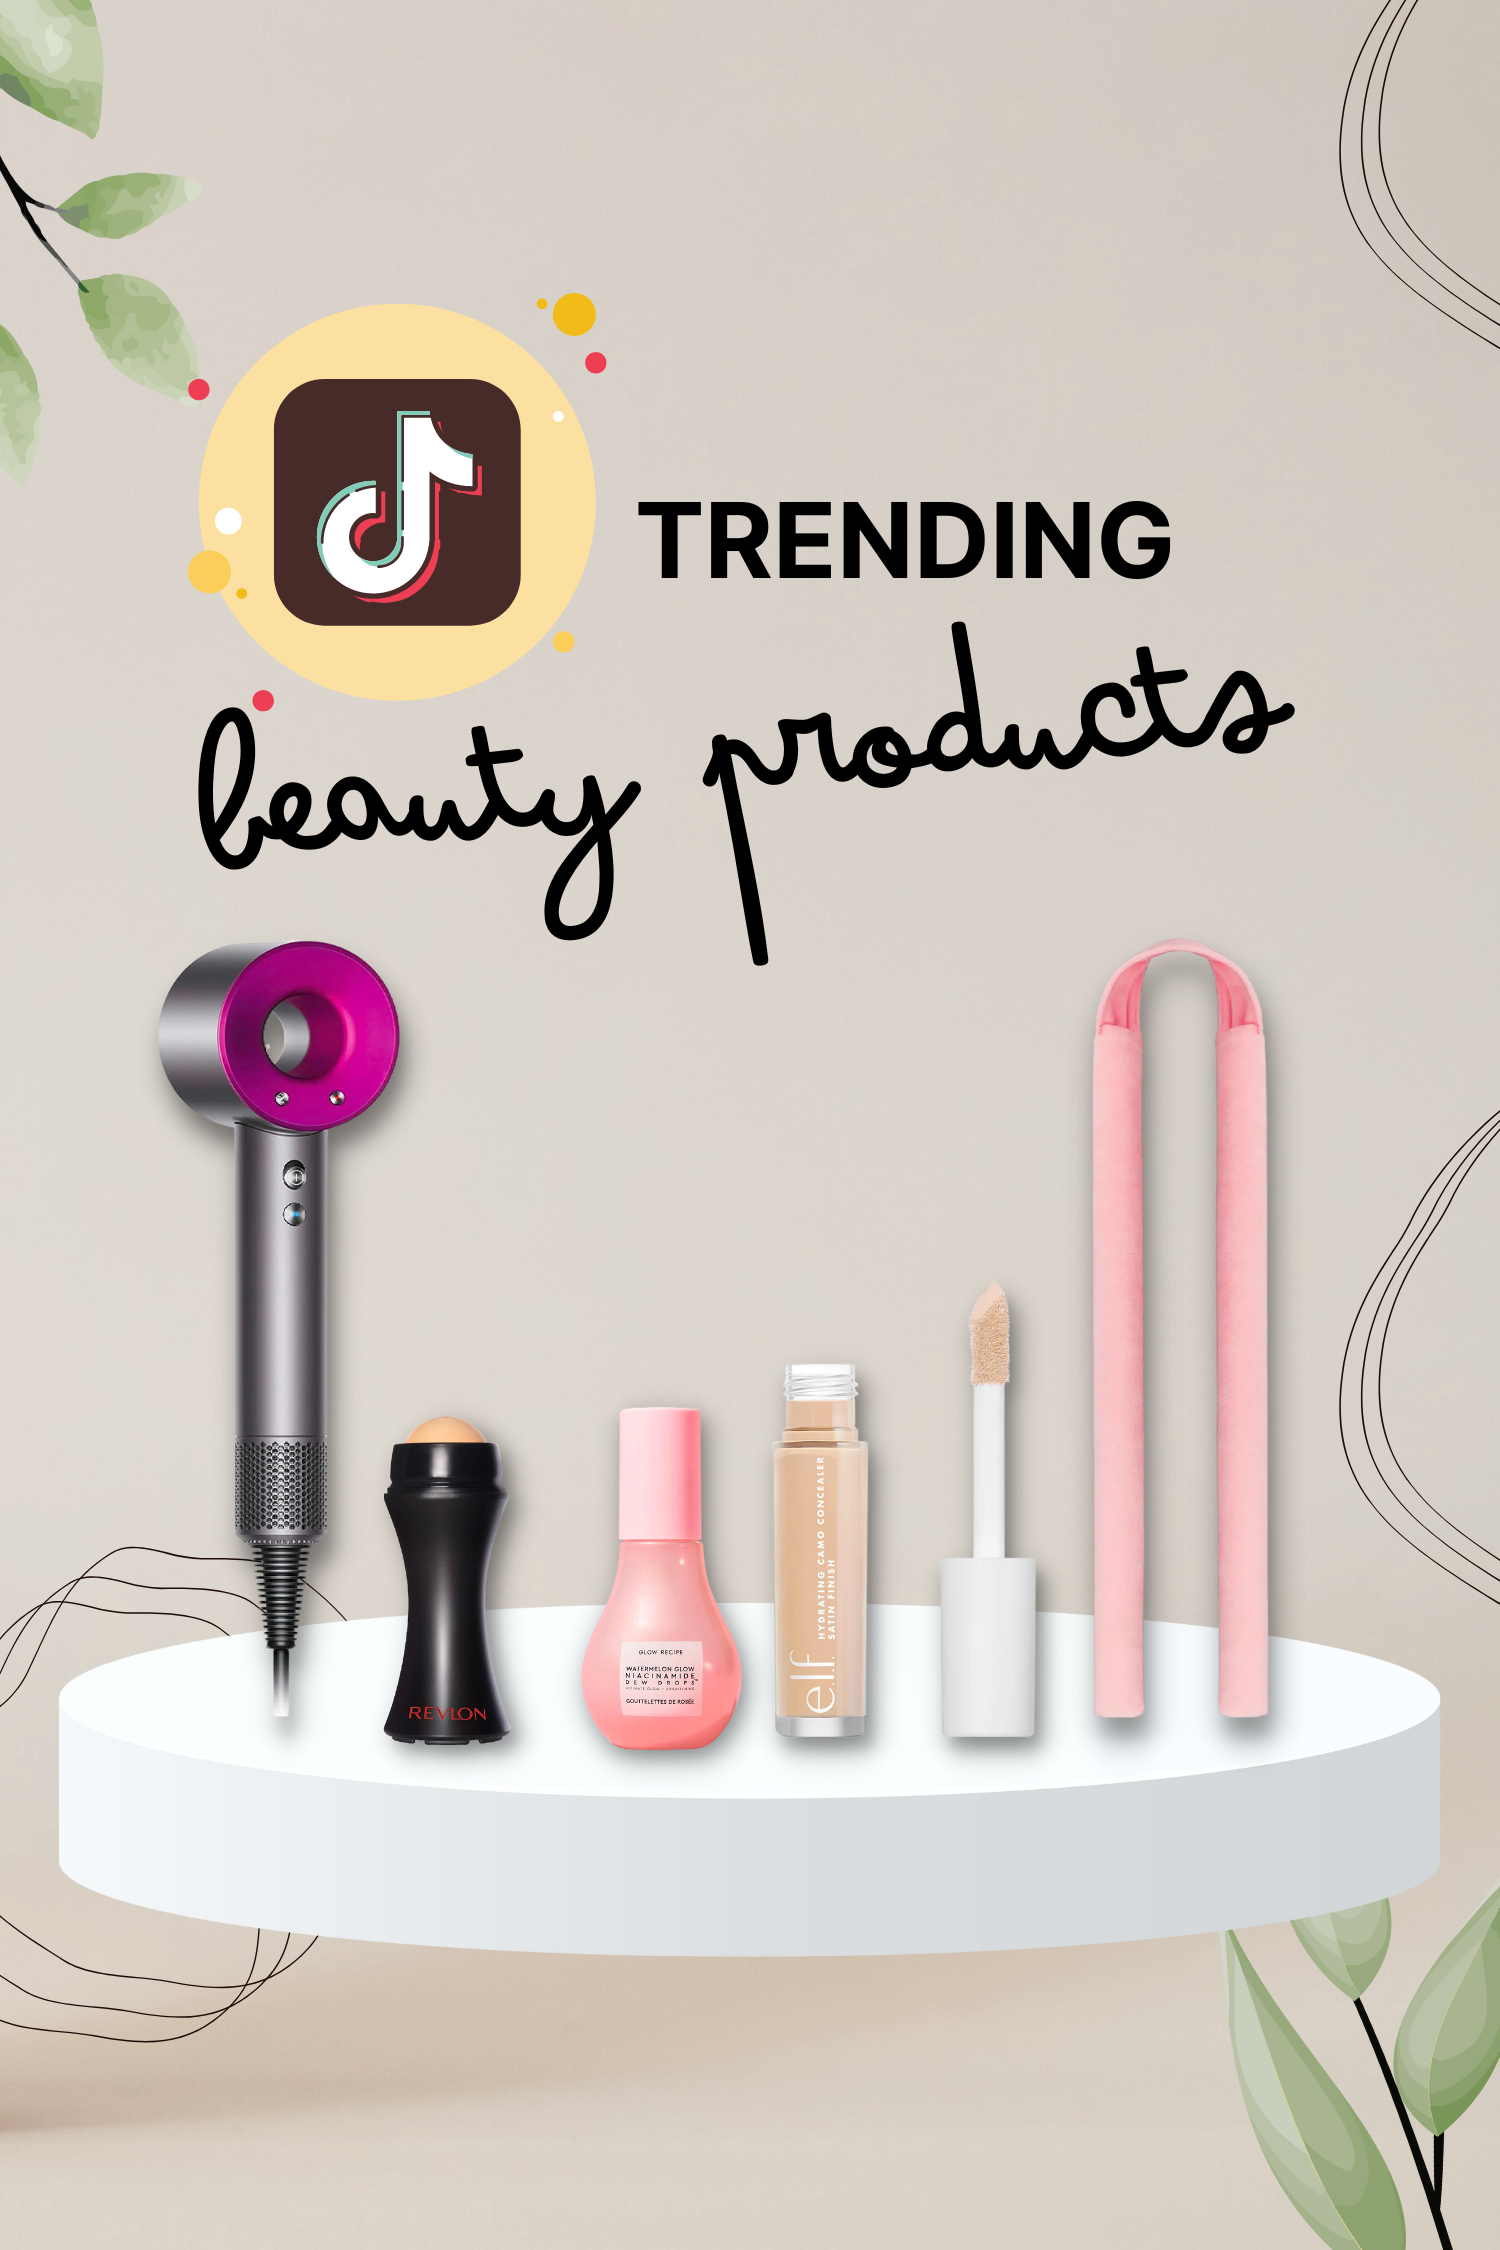 Best 5 Viral Tiktok Beauty Products 2022 - Wrapped Up!